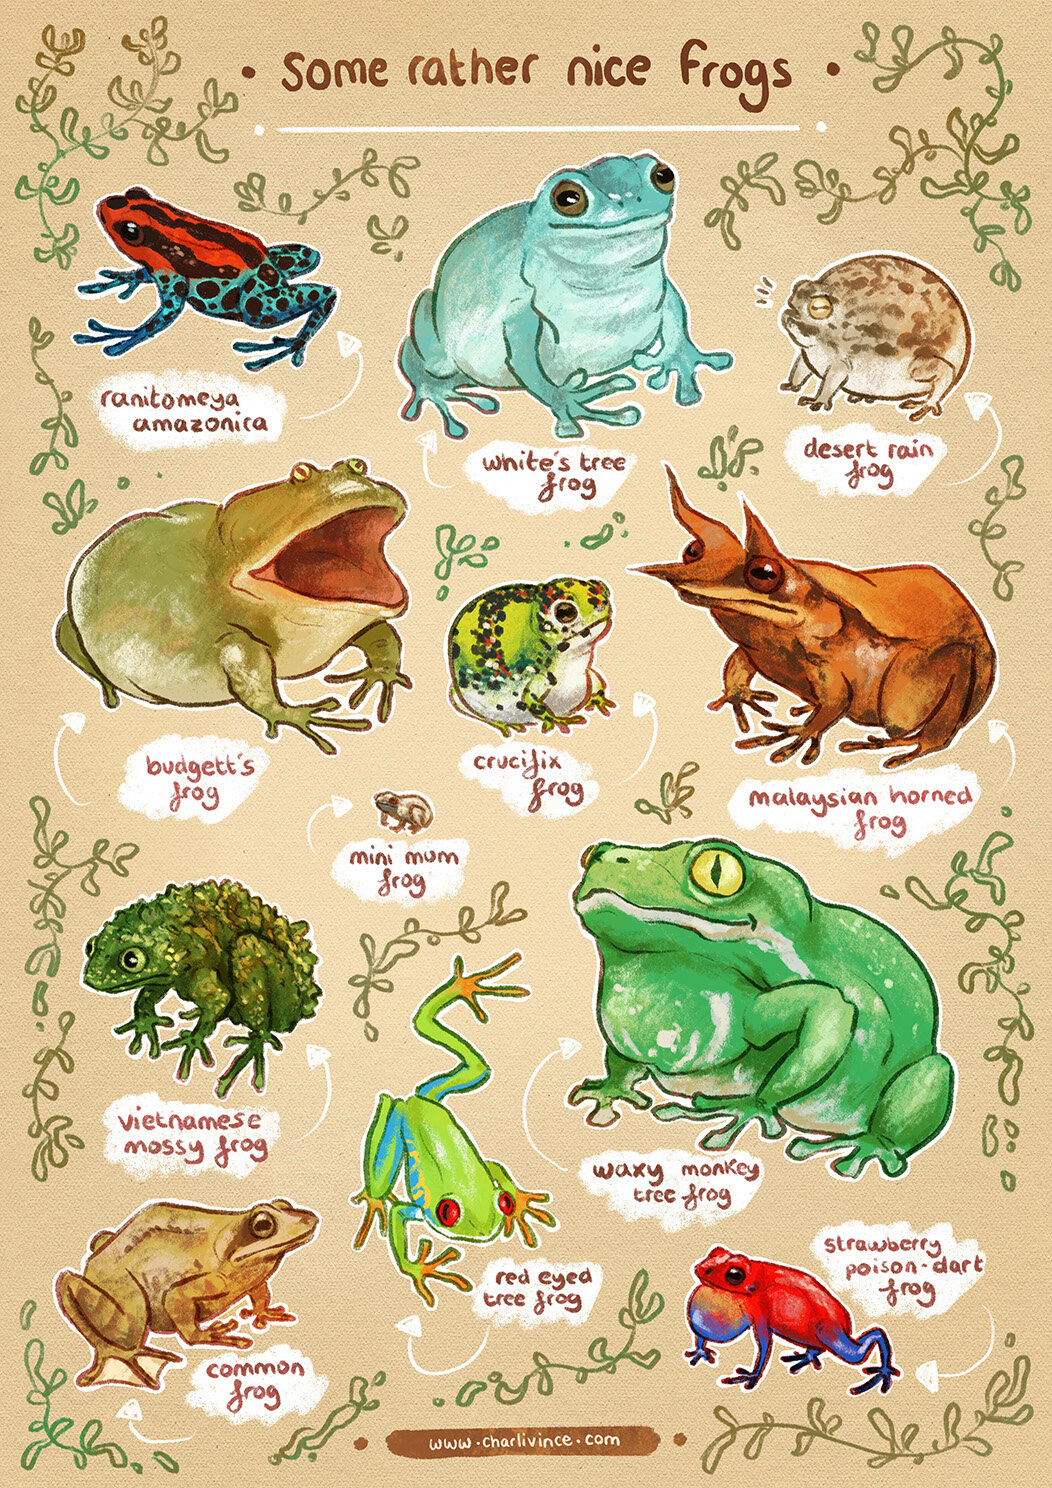 Some Rather Nice Frogs